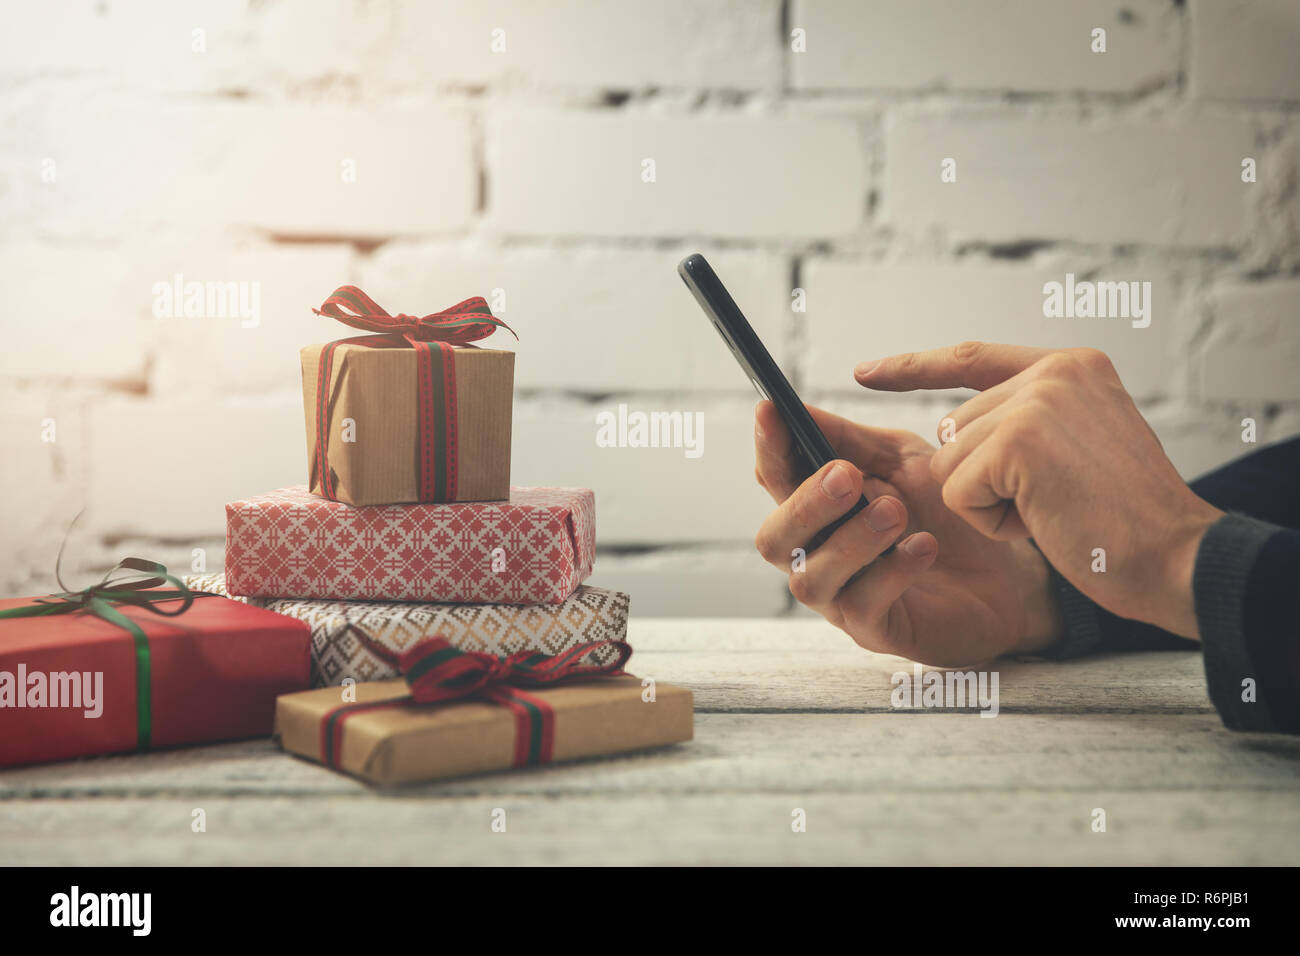 man using smartphone to buy gifts online at internet store Stock Photo